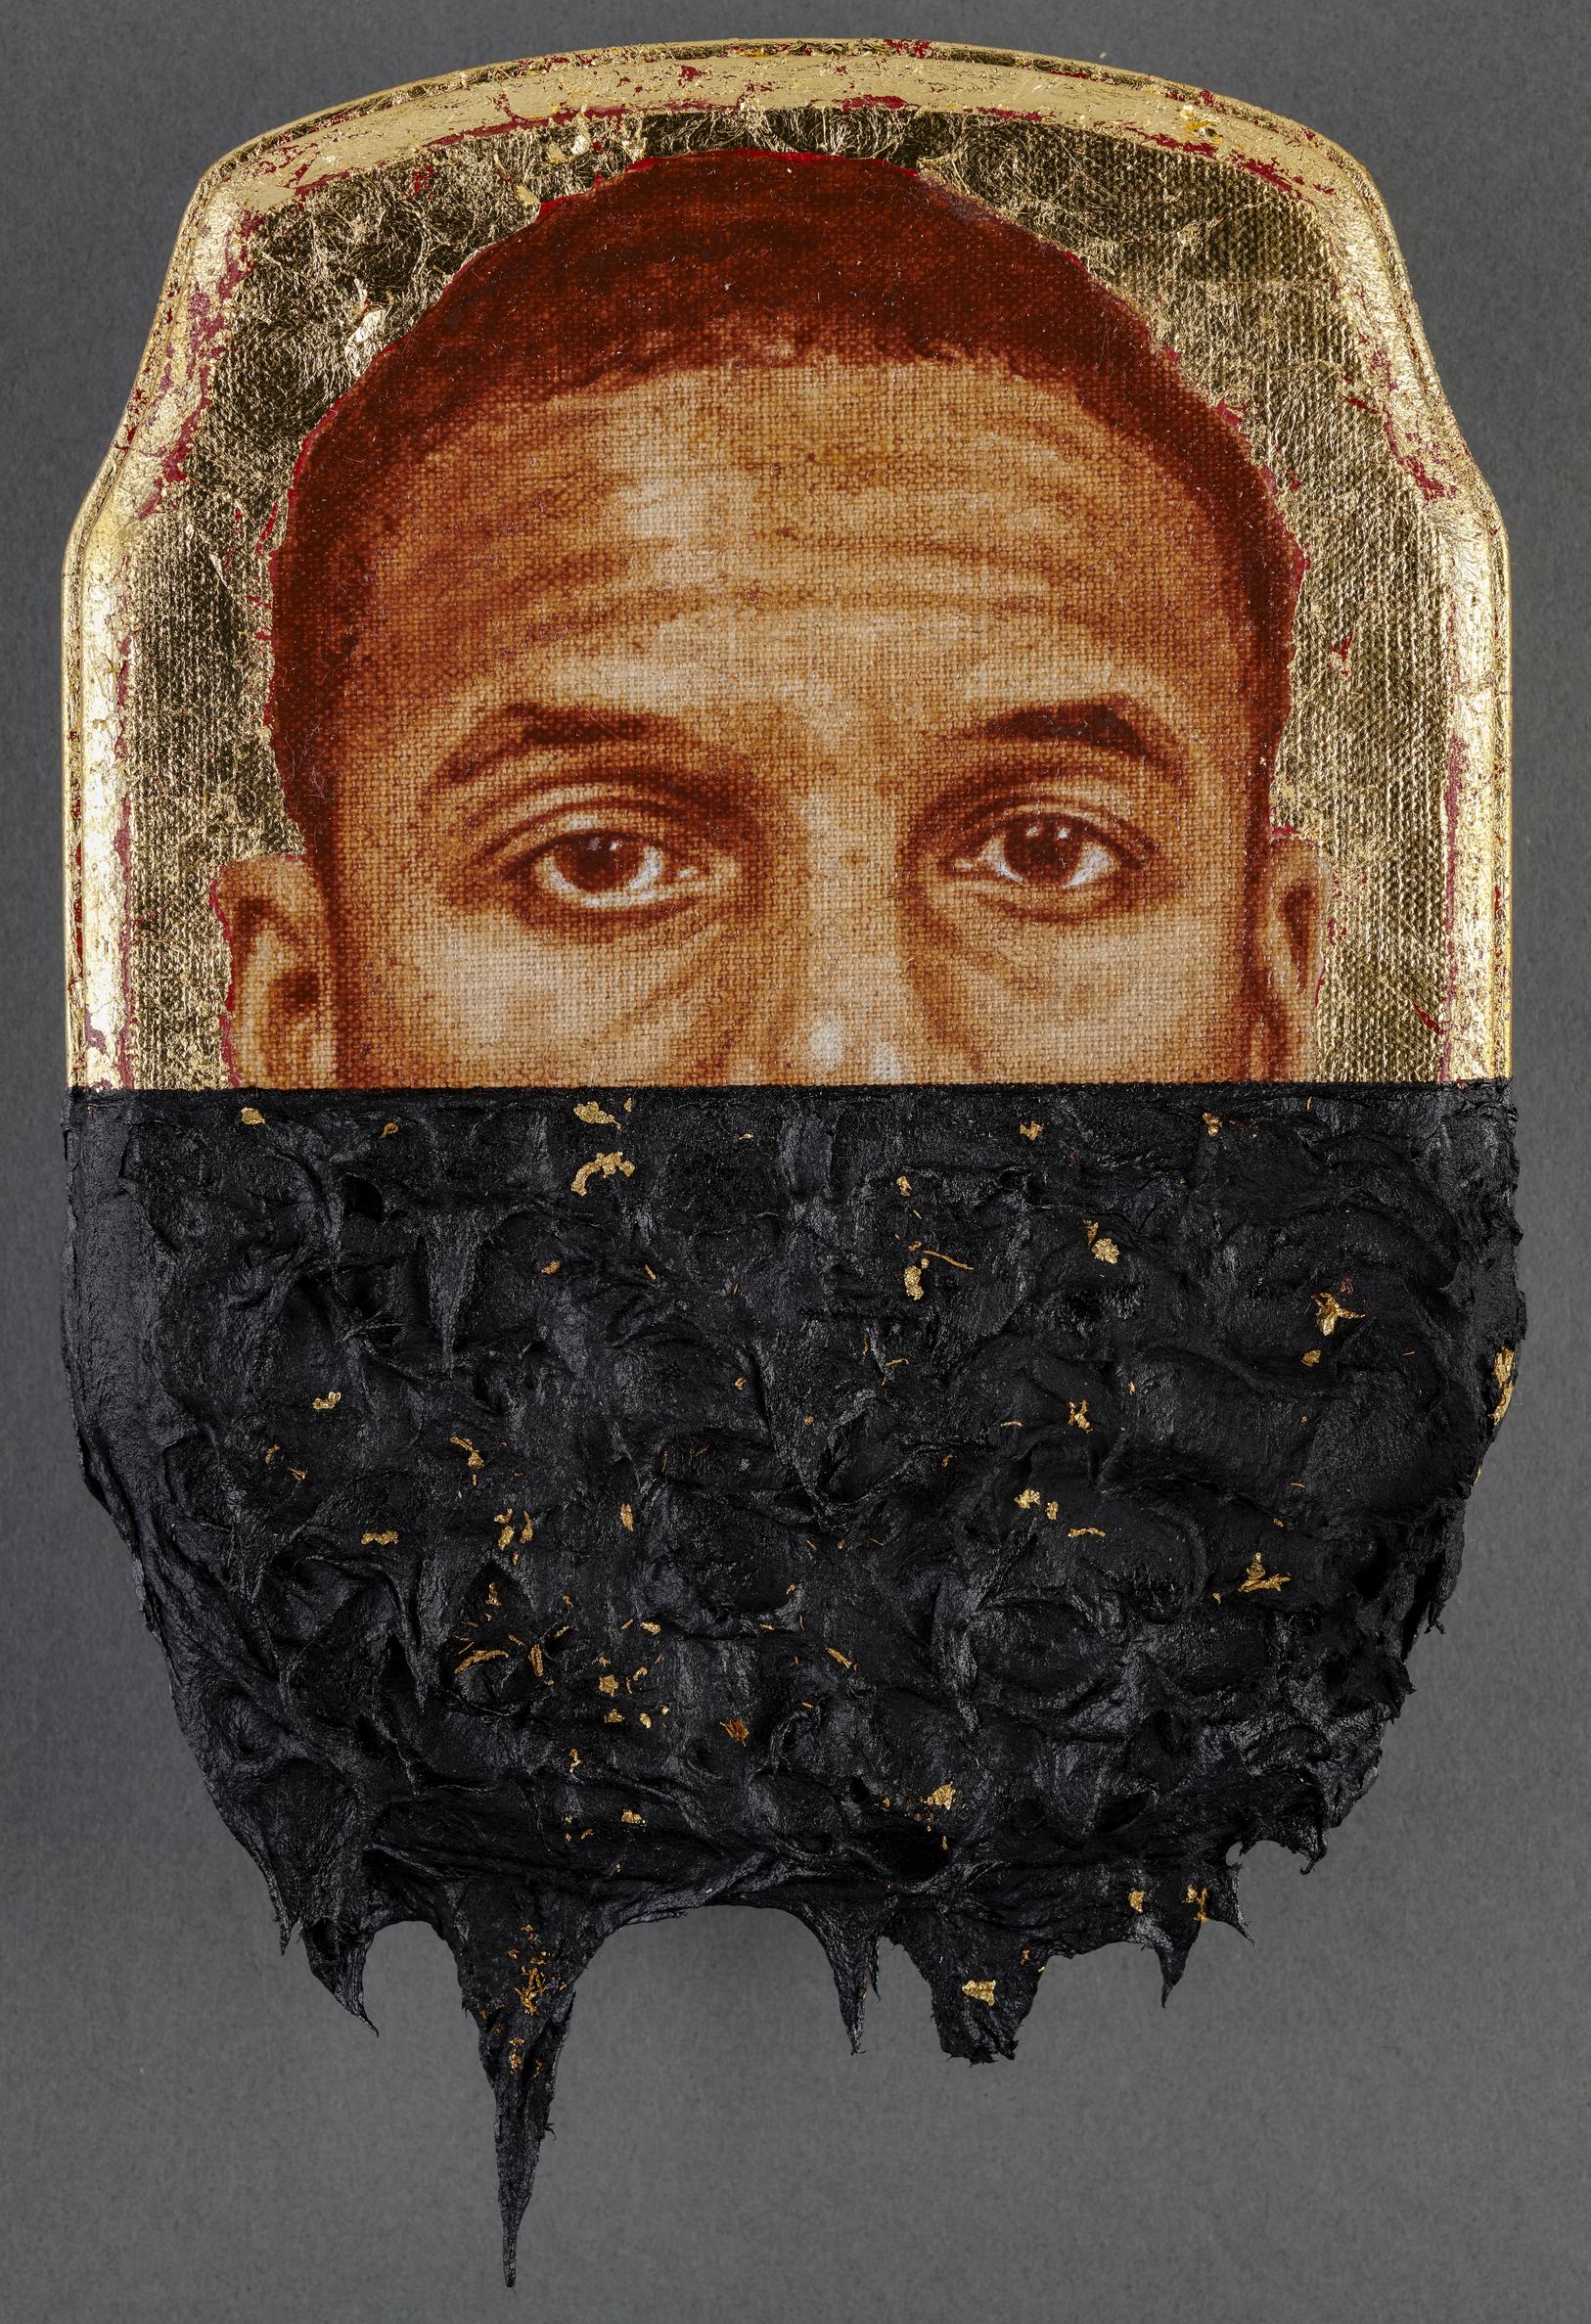 Titus Kaphar, Jerome LXI, 2020. Oil, tar, and gold leaf on panel. 25.4 x 19.1 cm (10 x 7 1/2 in.). Private Collection.